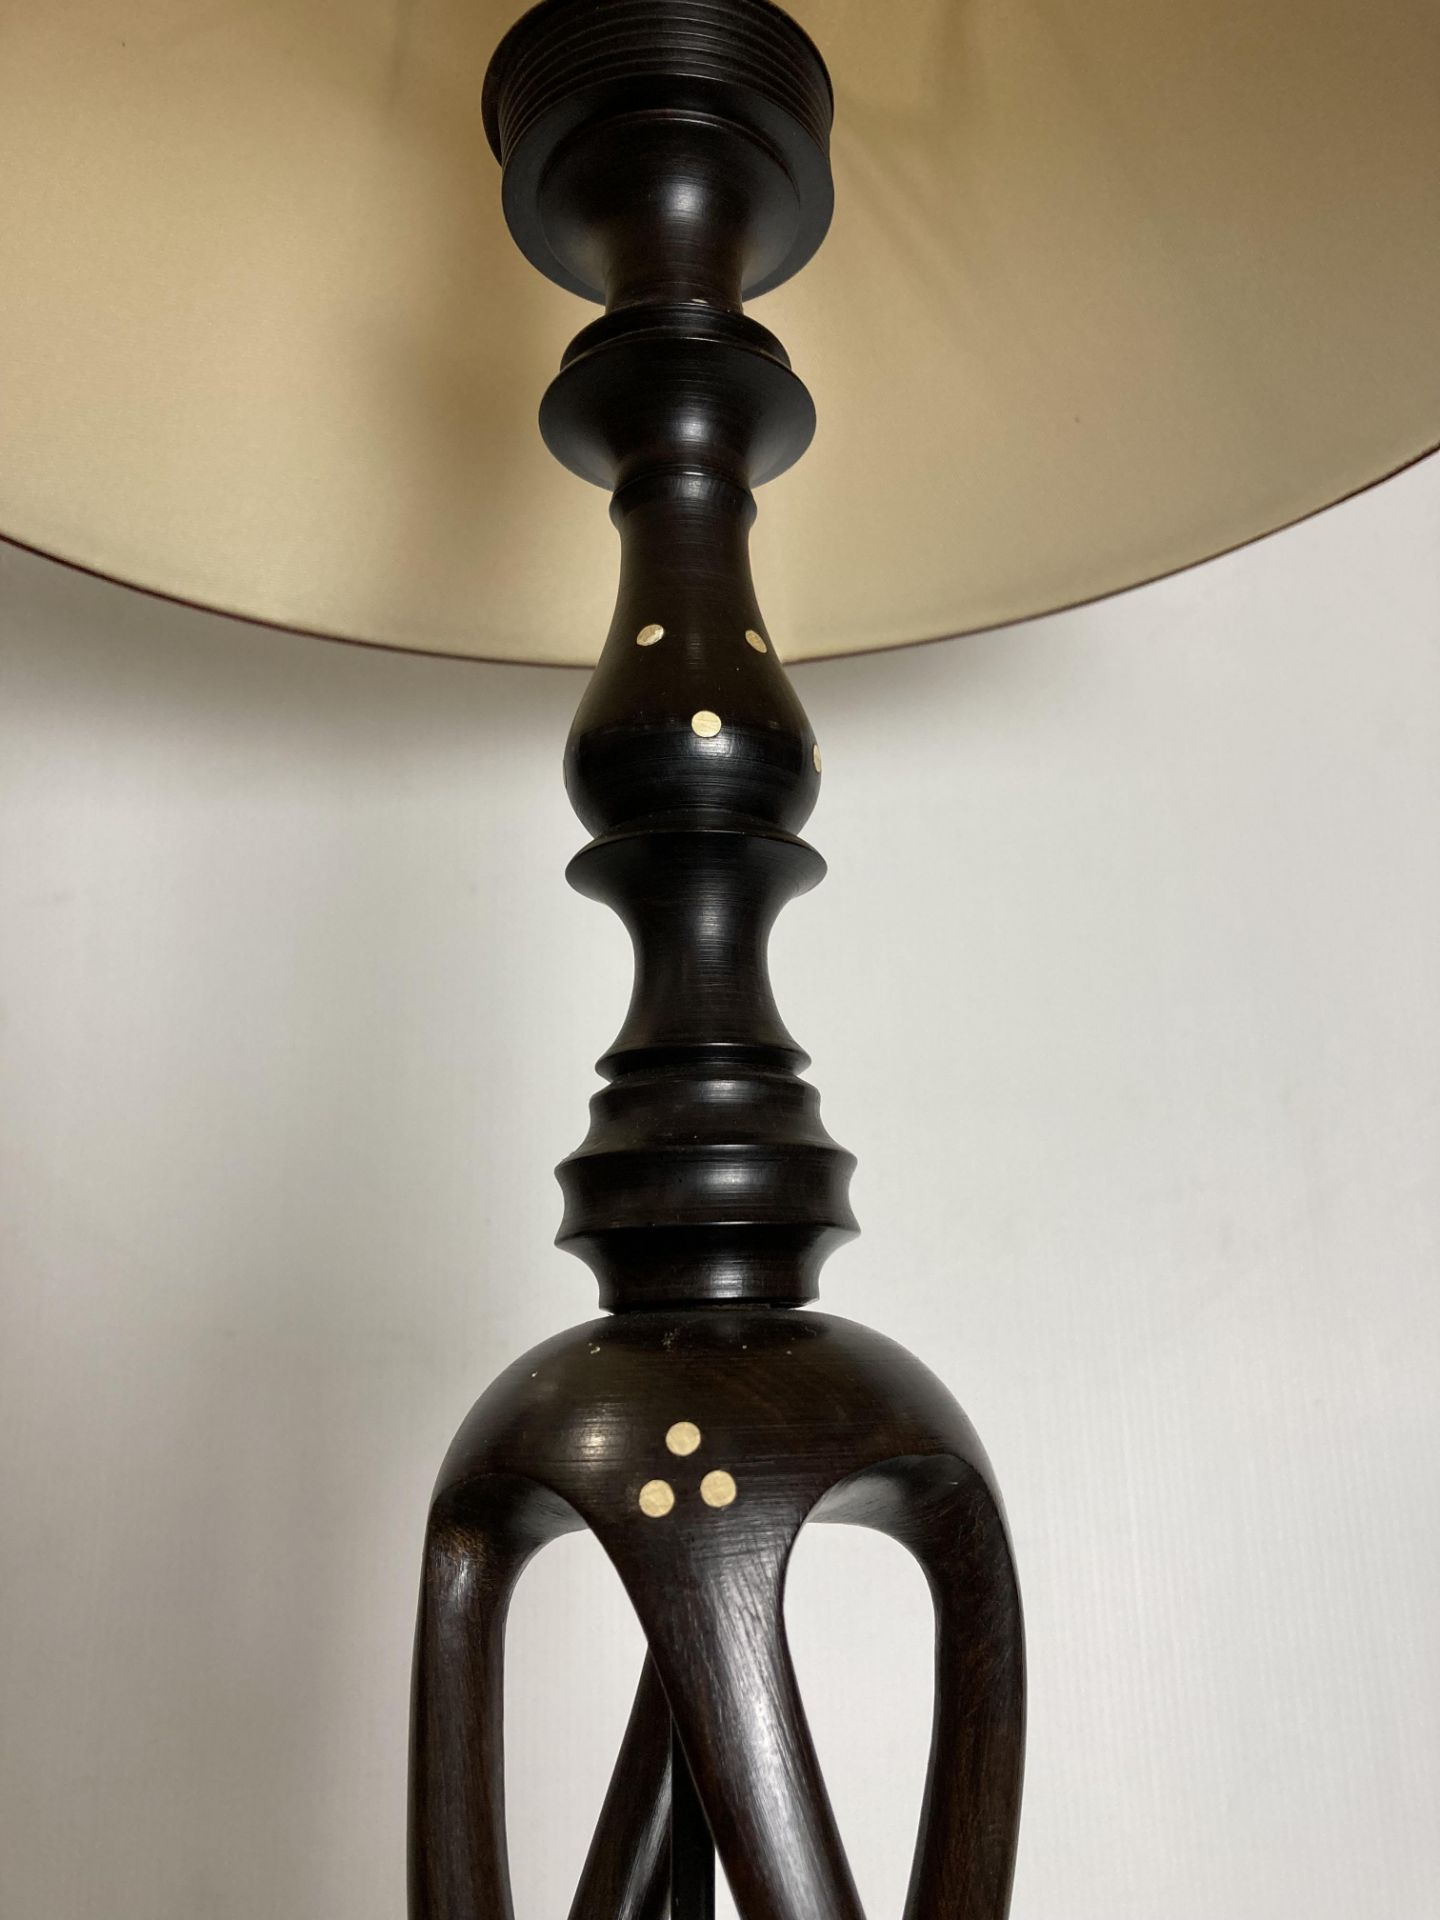 Beautiful ebony wooden turned standard lamp with four-stem twisted column inlaid with white spots - Image 4 of 4